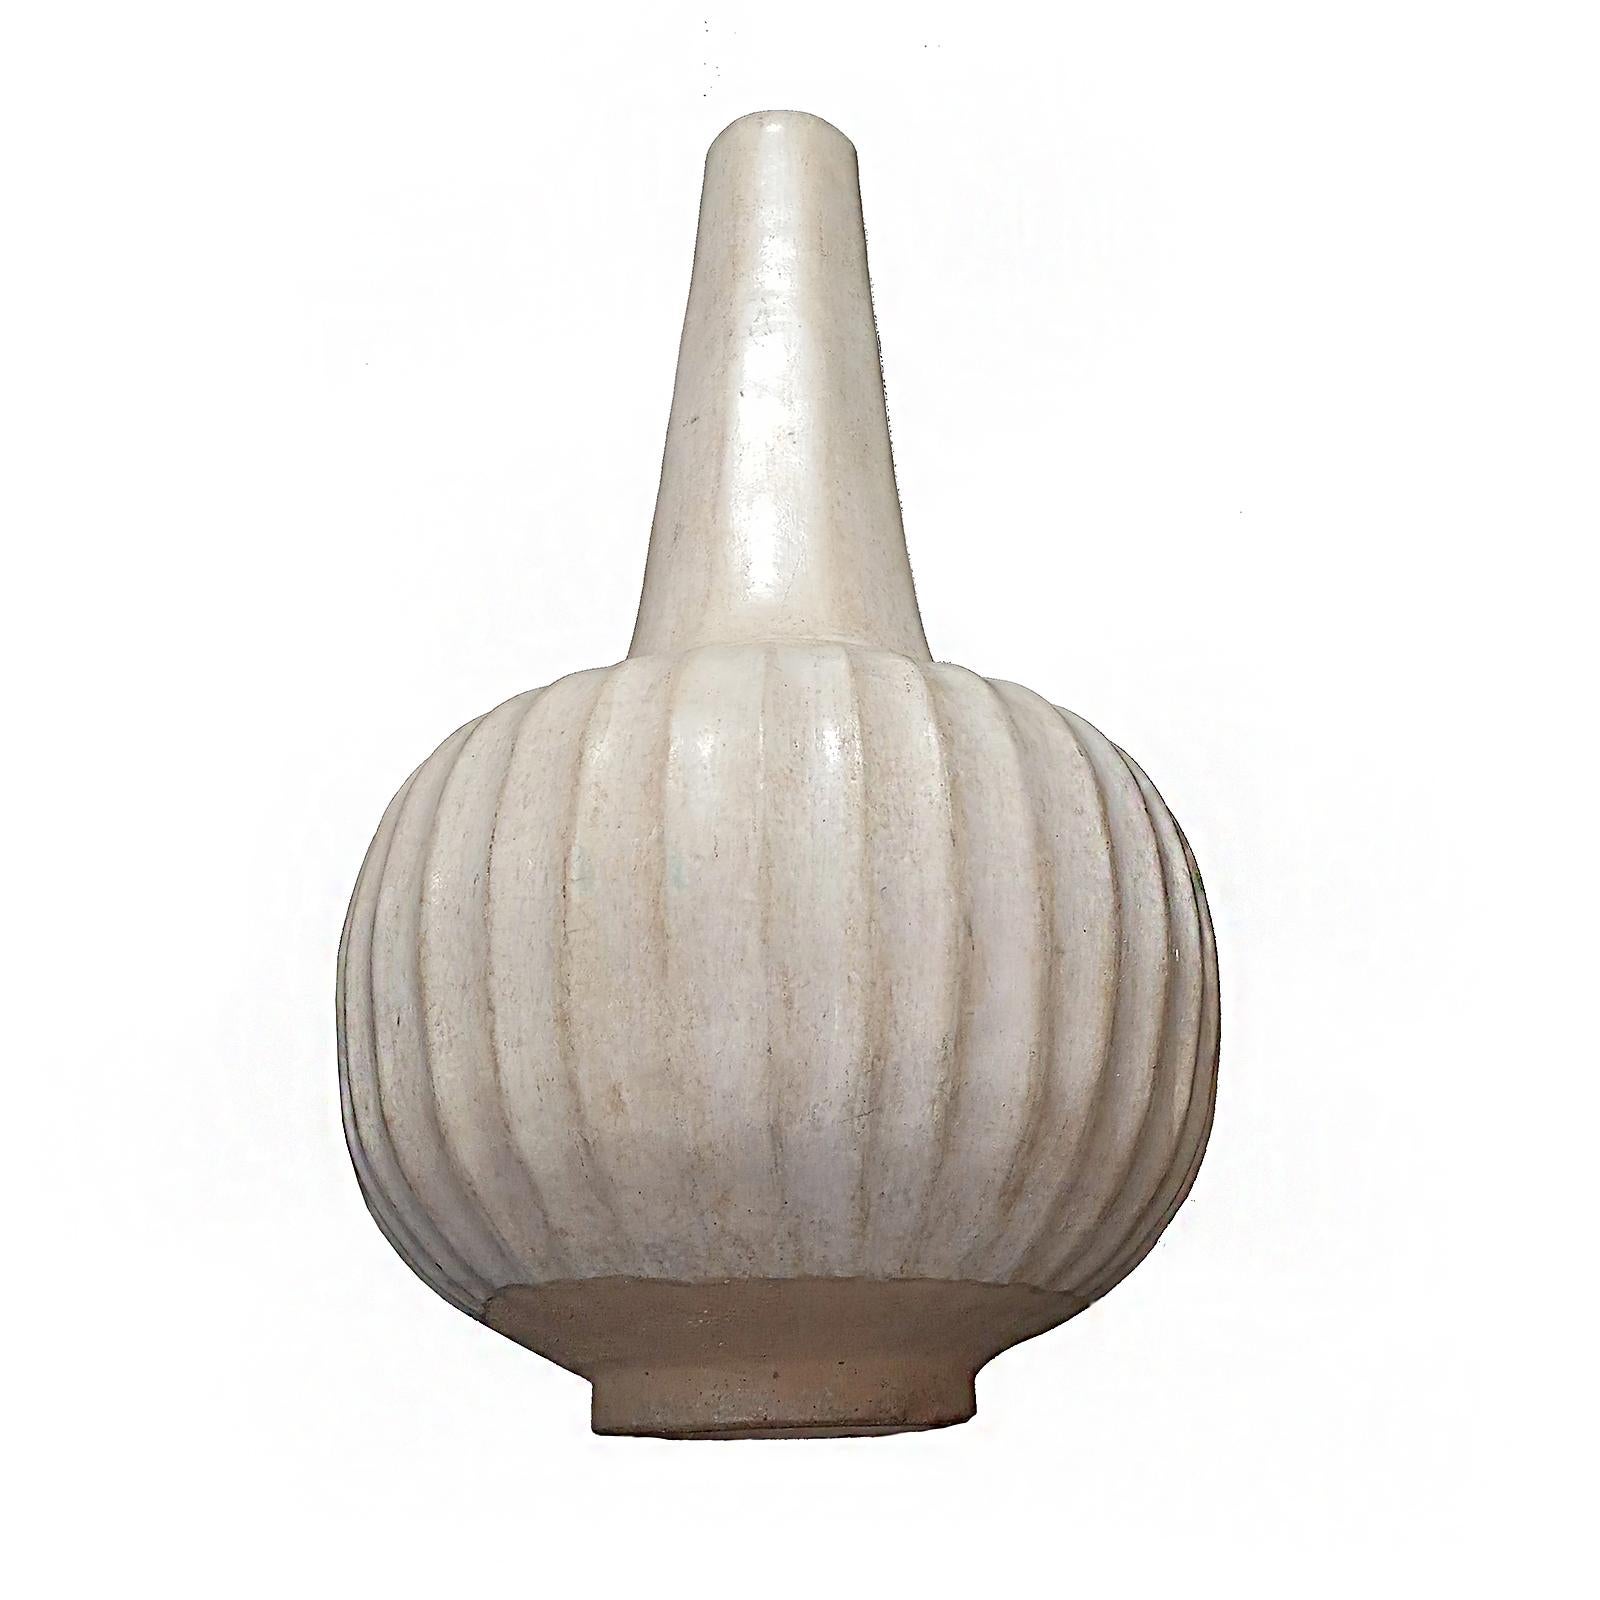 A ceramic vase from Thailand, with light beige glaze. Contemporary. 

While the golden age of Thai ceramics ended around the 15-16th Centuries, local craftsmen learned the art through generations, later producing smaller numbers of pieces with